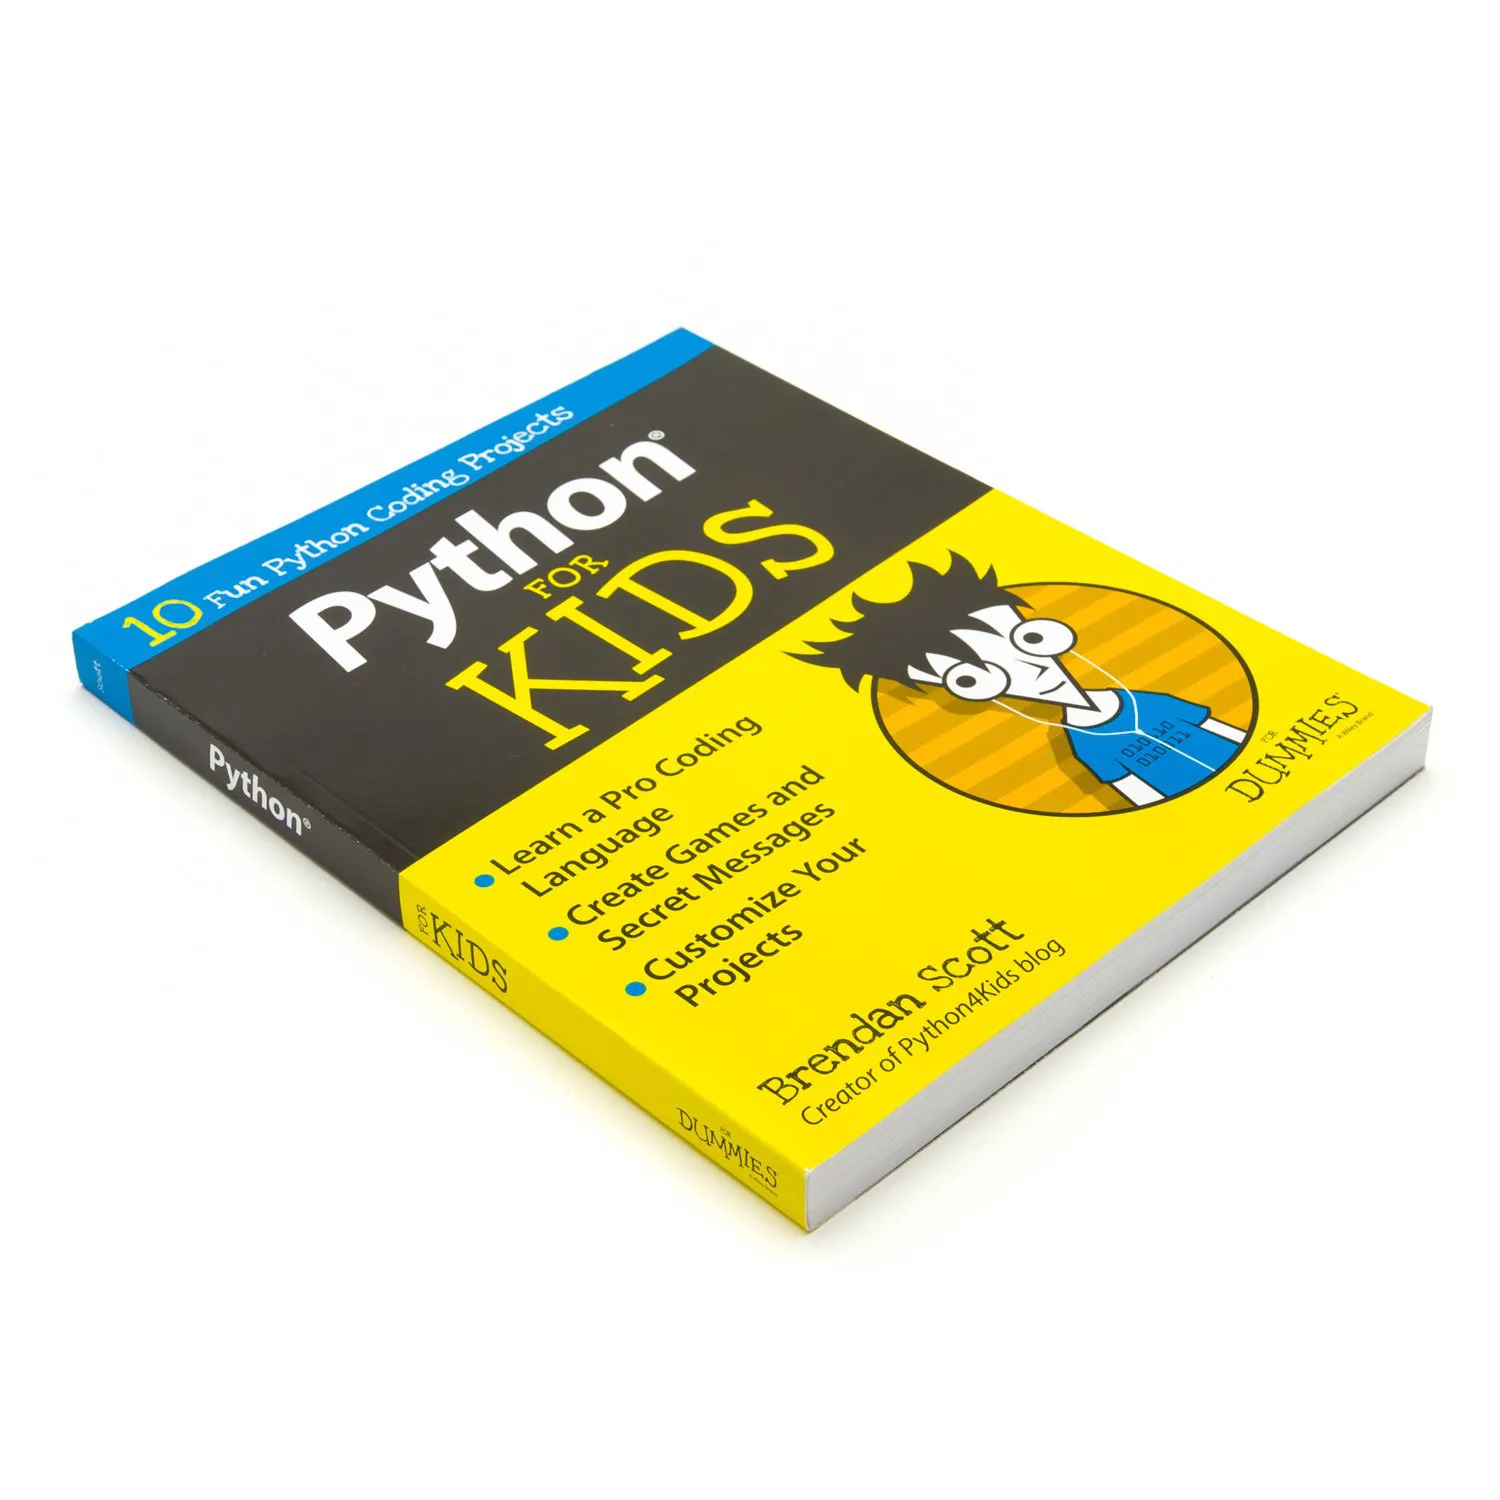 Photo of Python for Kids For Dummies